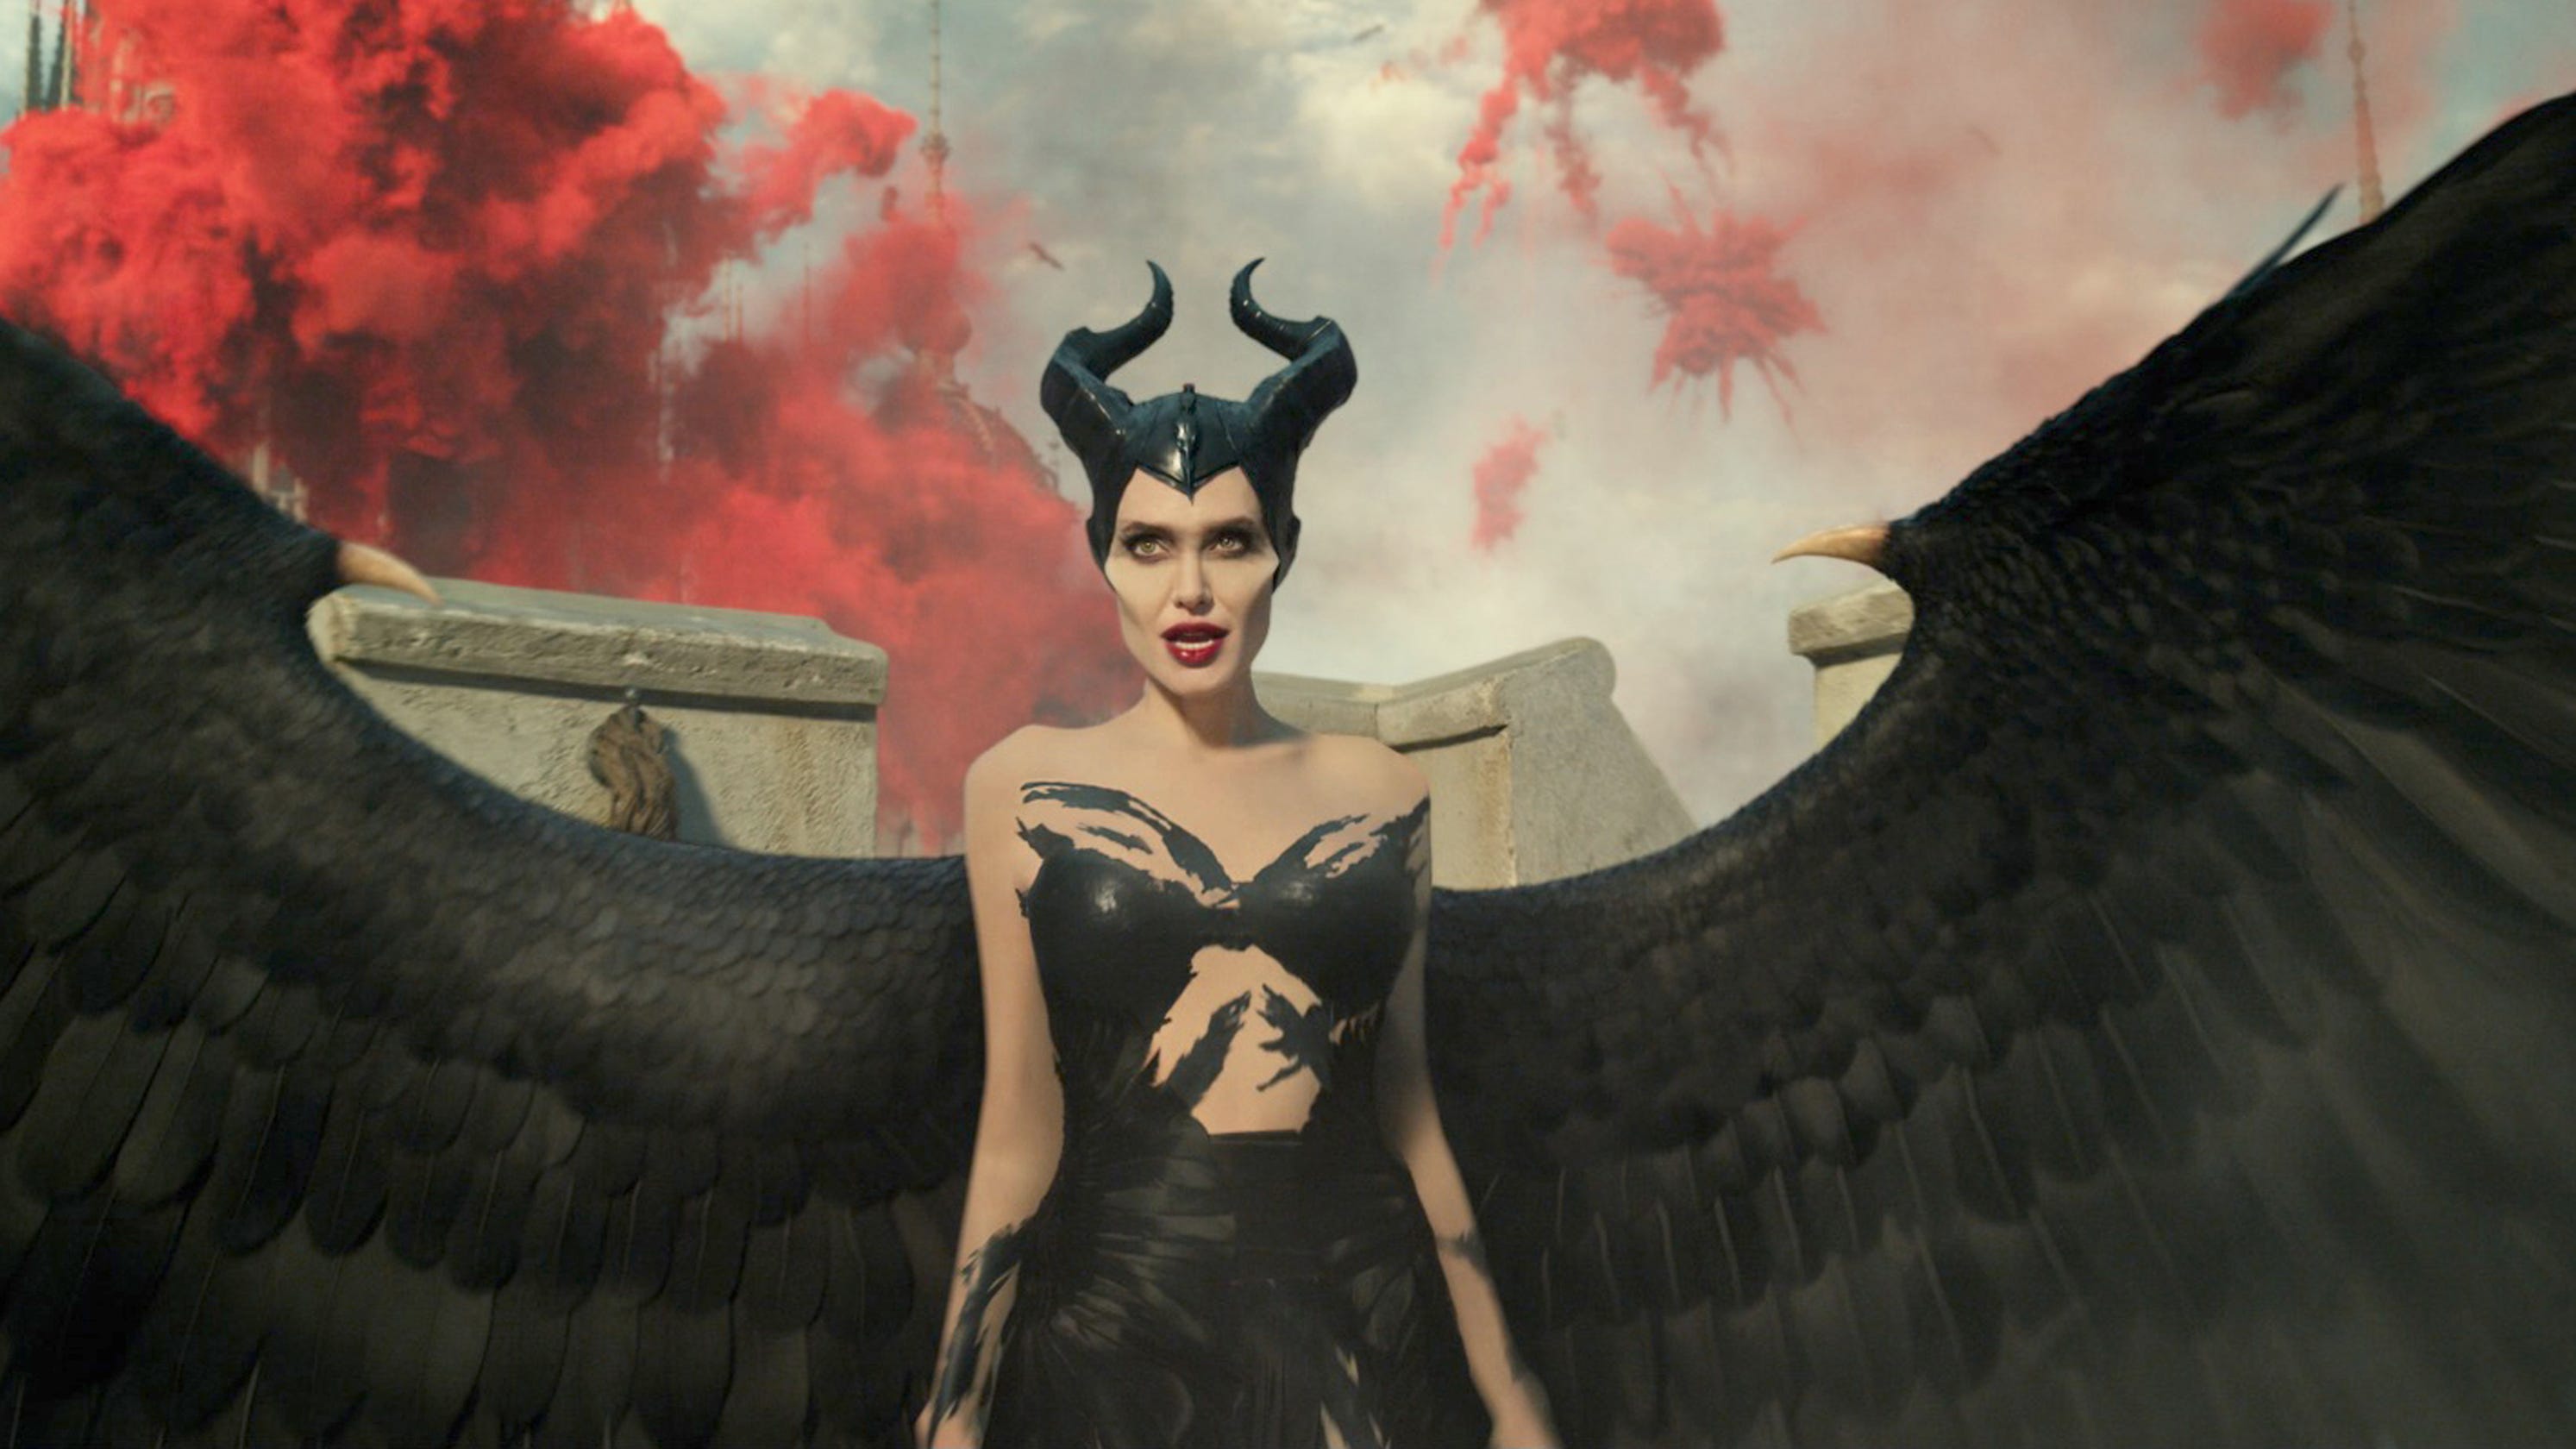 movie review of maleficent 2